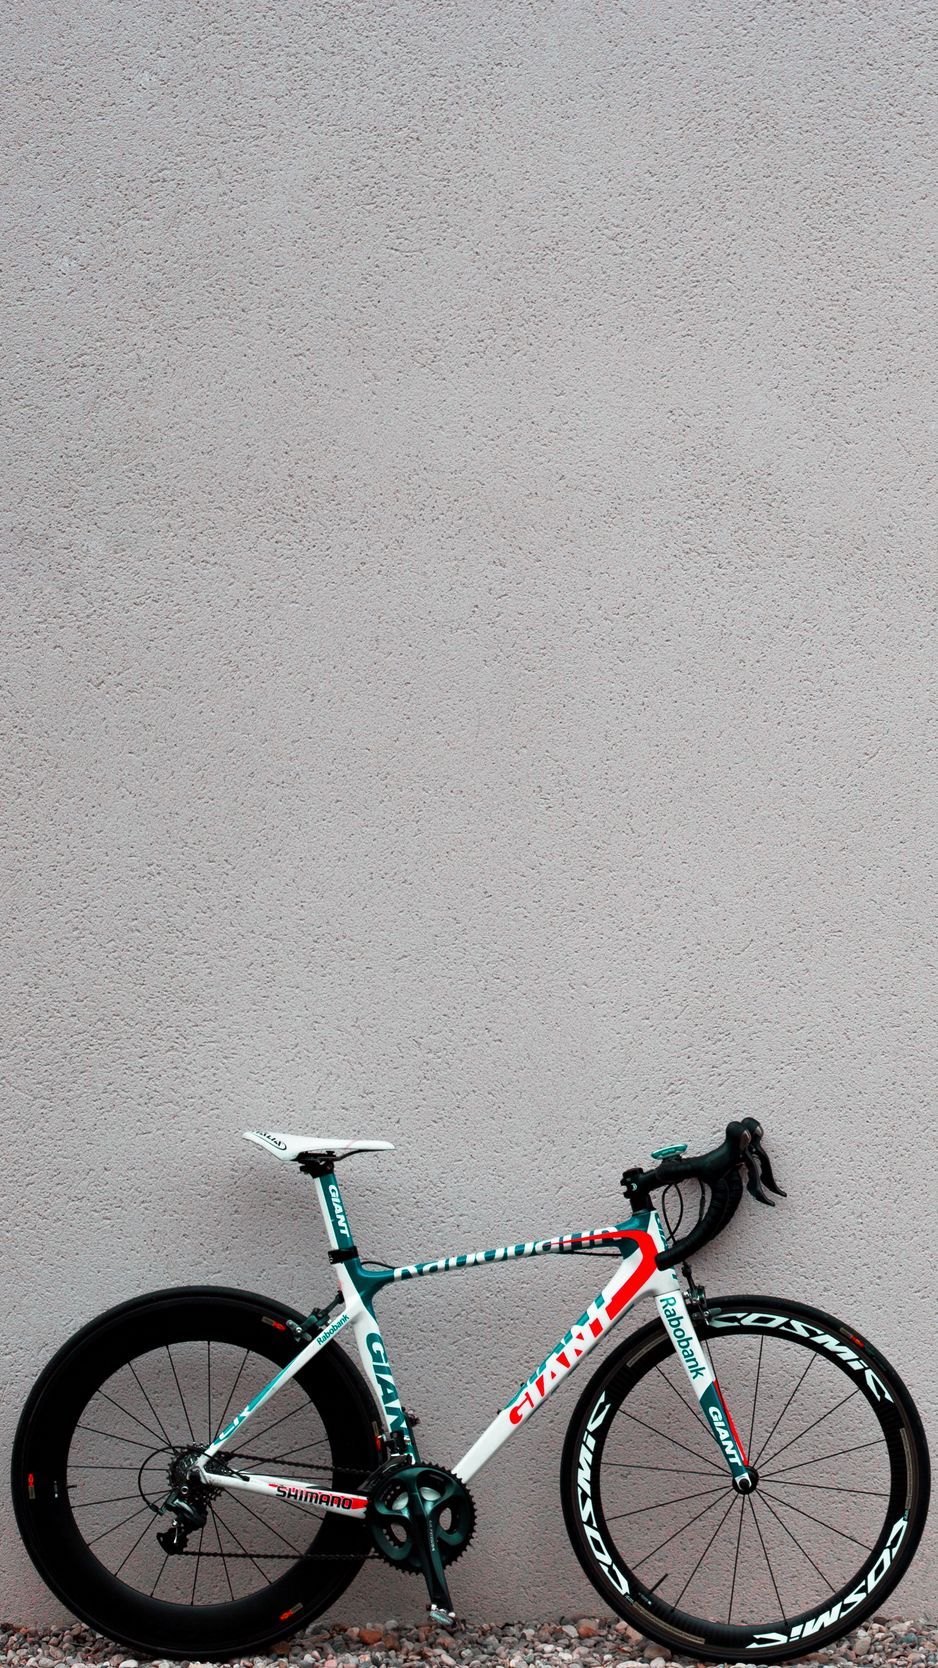 Download Wallpaper 938x1668 Bicycle, Wall, Sports Iphone 8 7 6s 6